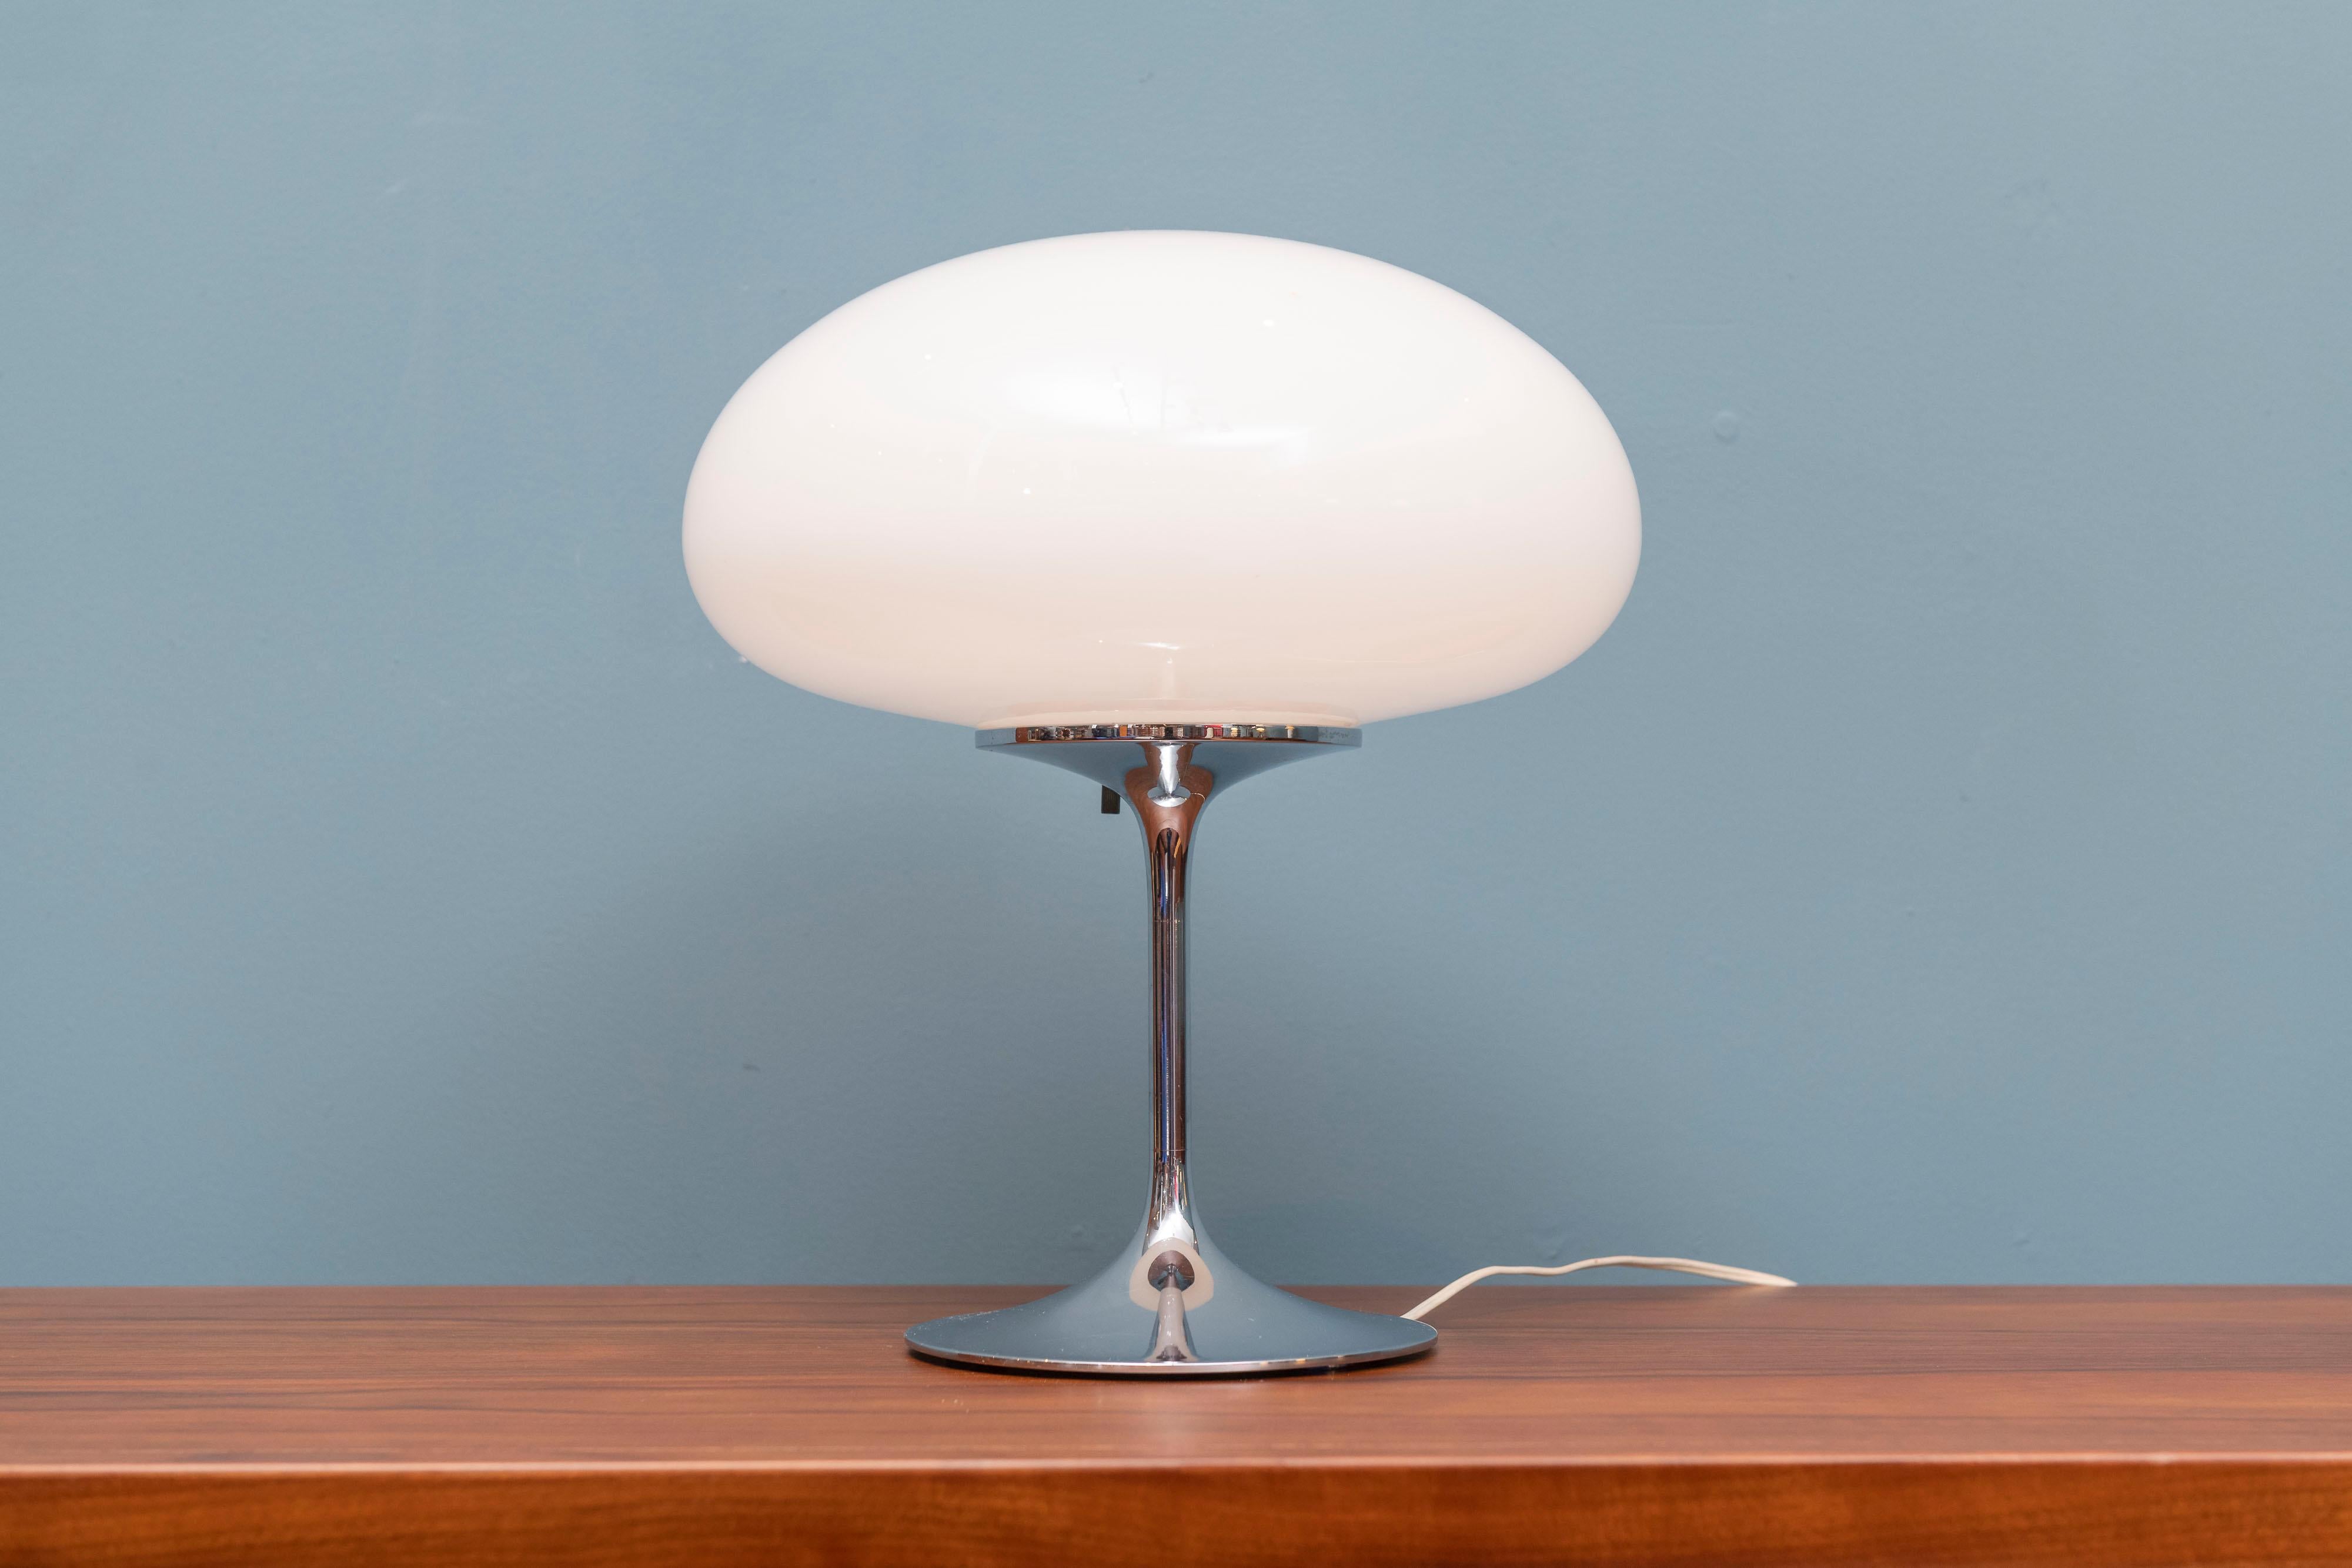 Bill Curry Stemlite table lamp for Design Line, Ca. Original glass shade with newer wiring.